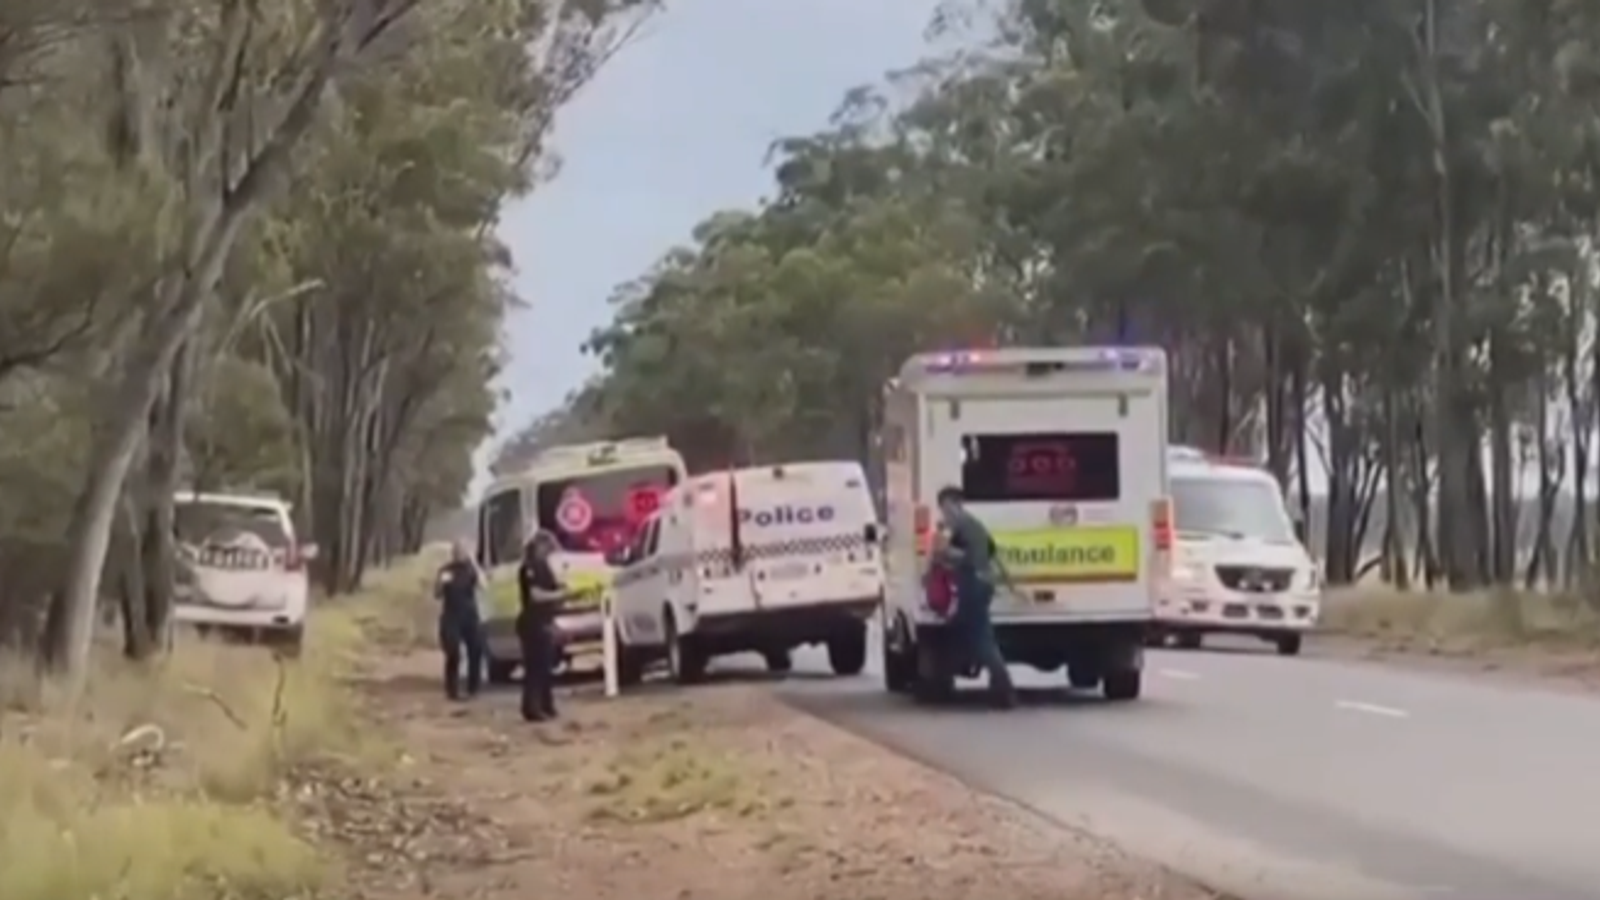 Two police officers killed 'execution-style' in ambush in rural Australia 